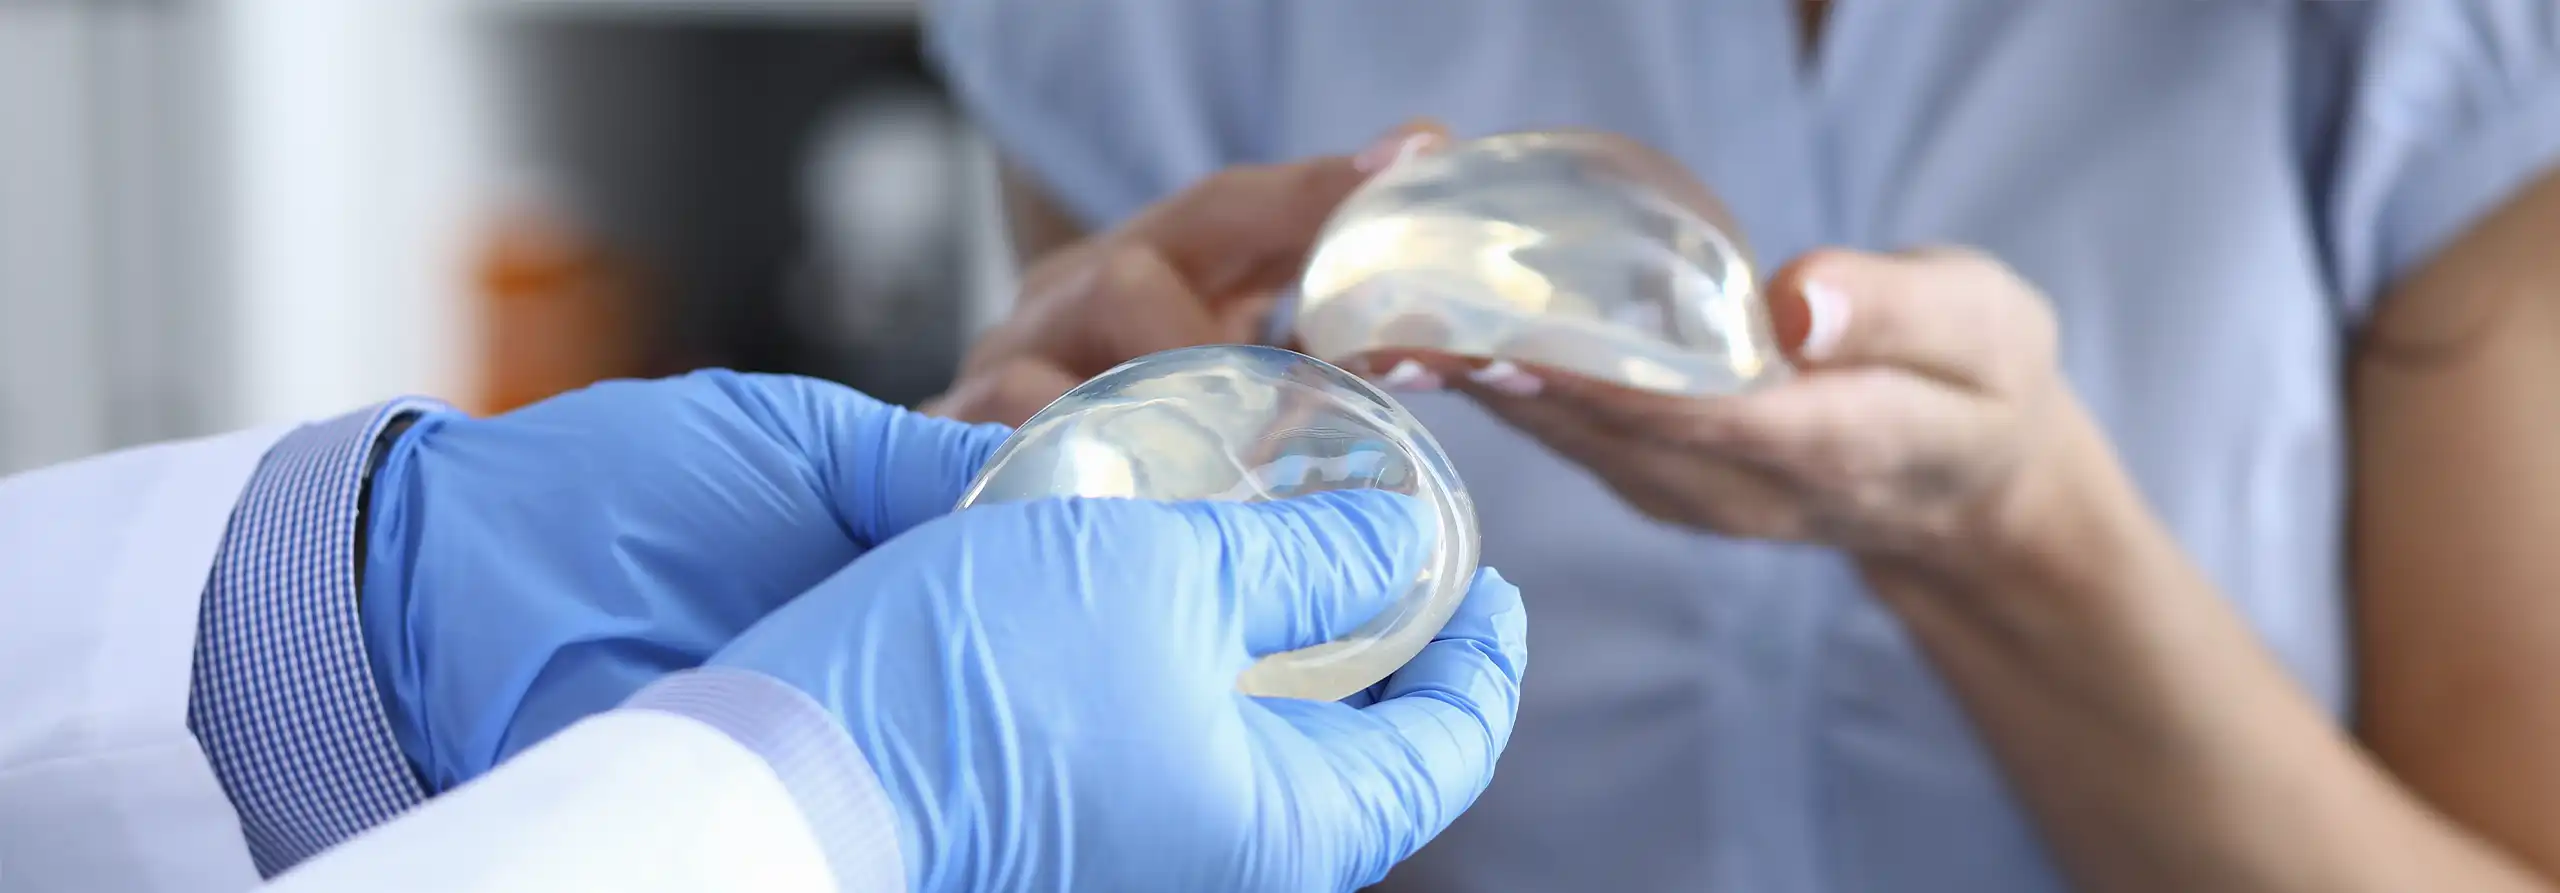 5 Potential Problems With Breast Implants